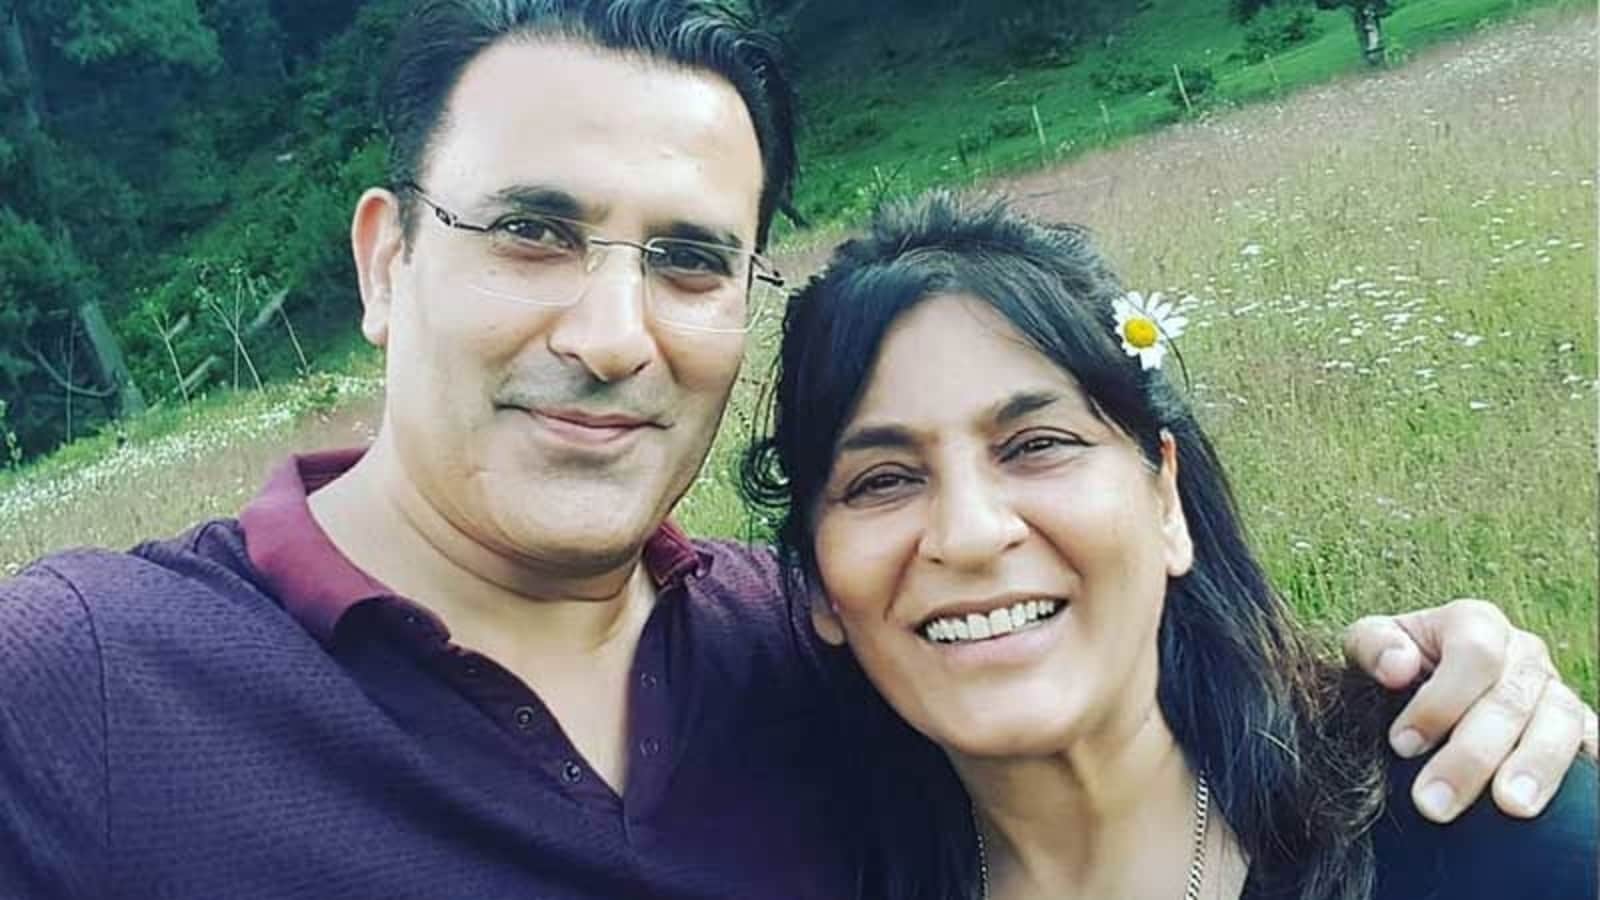 Archana Puran Singh on being more successful than Parmeet Sethi: ‘We laugh at how our life story would be like Abhimaan’